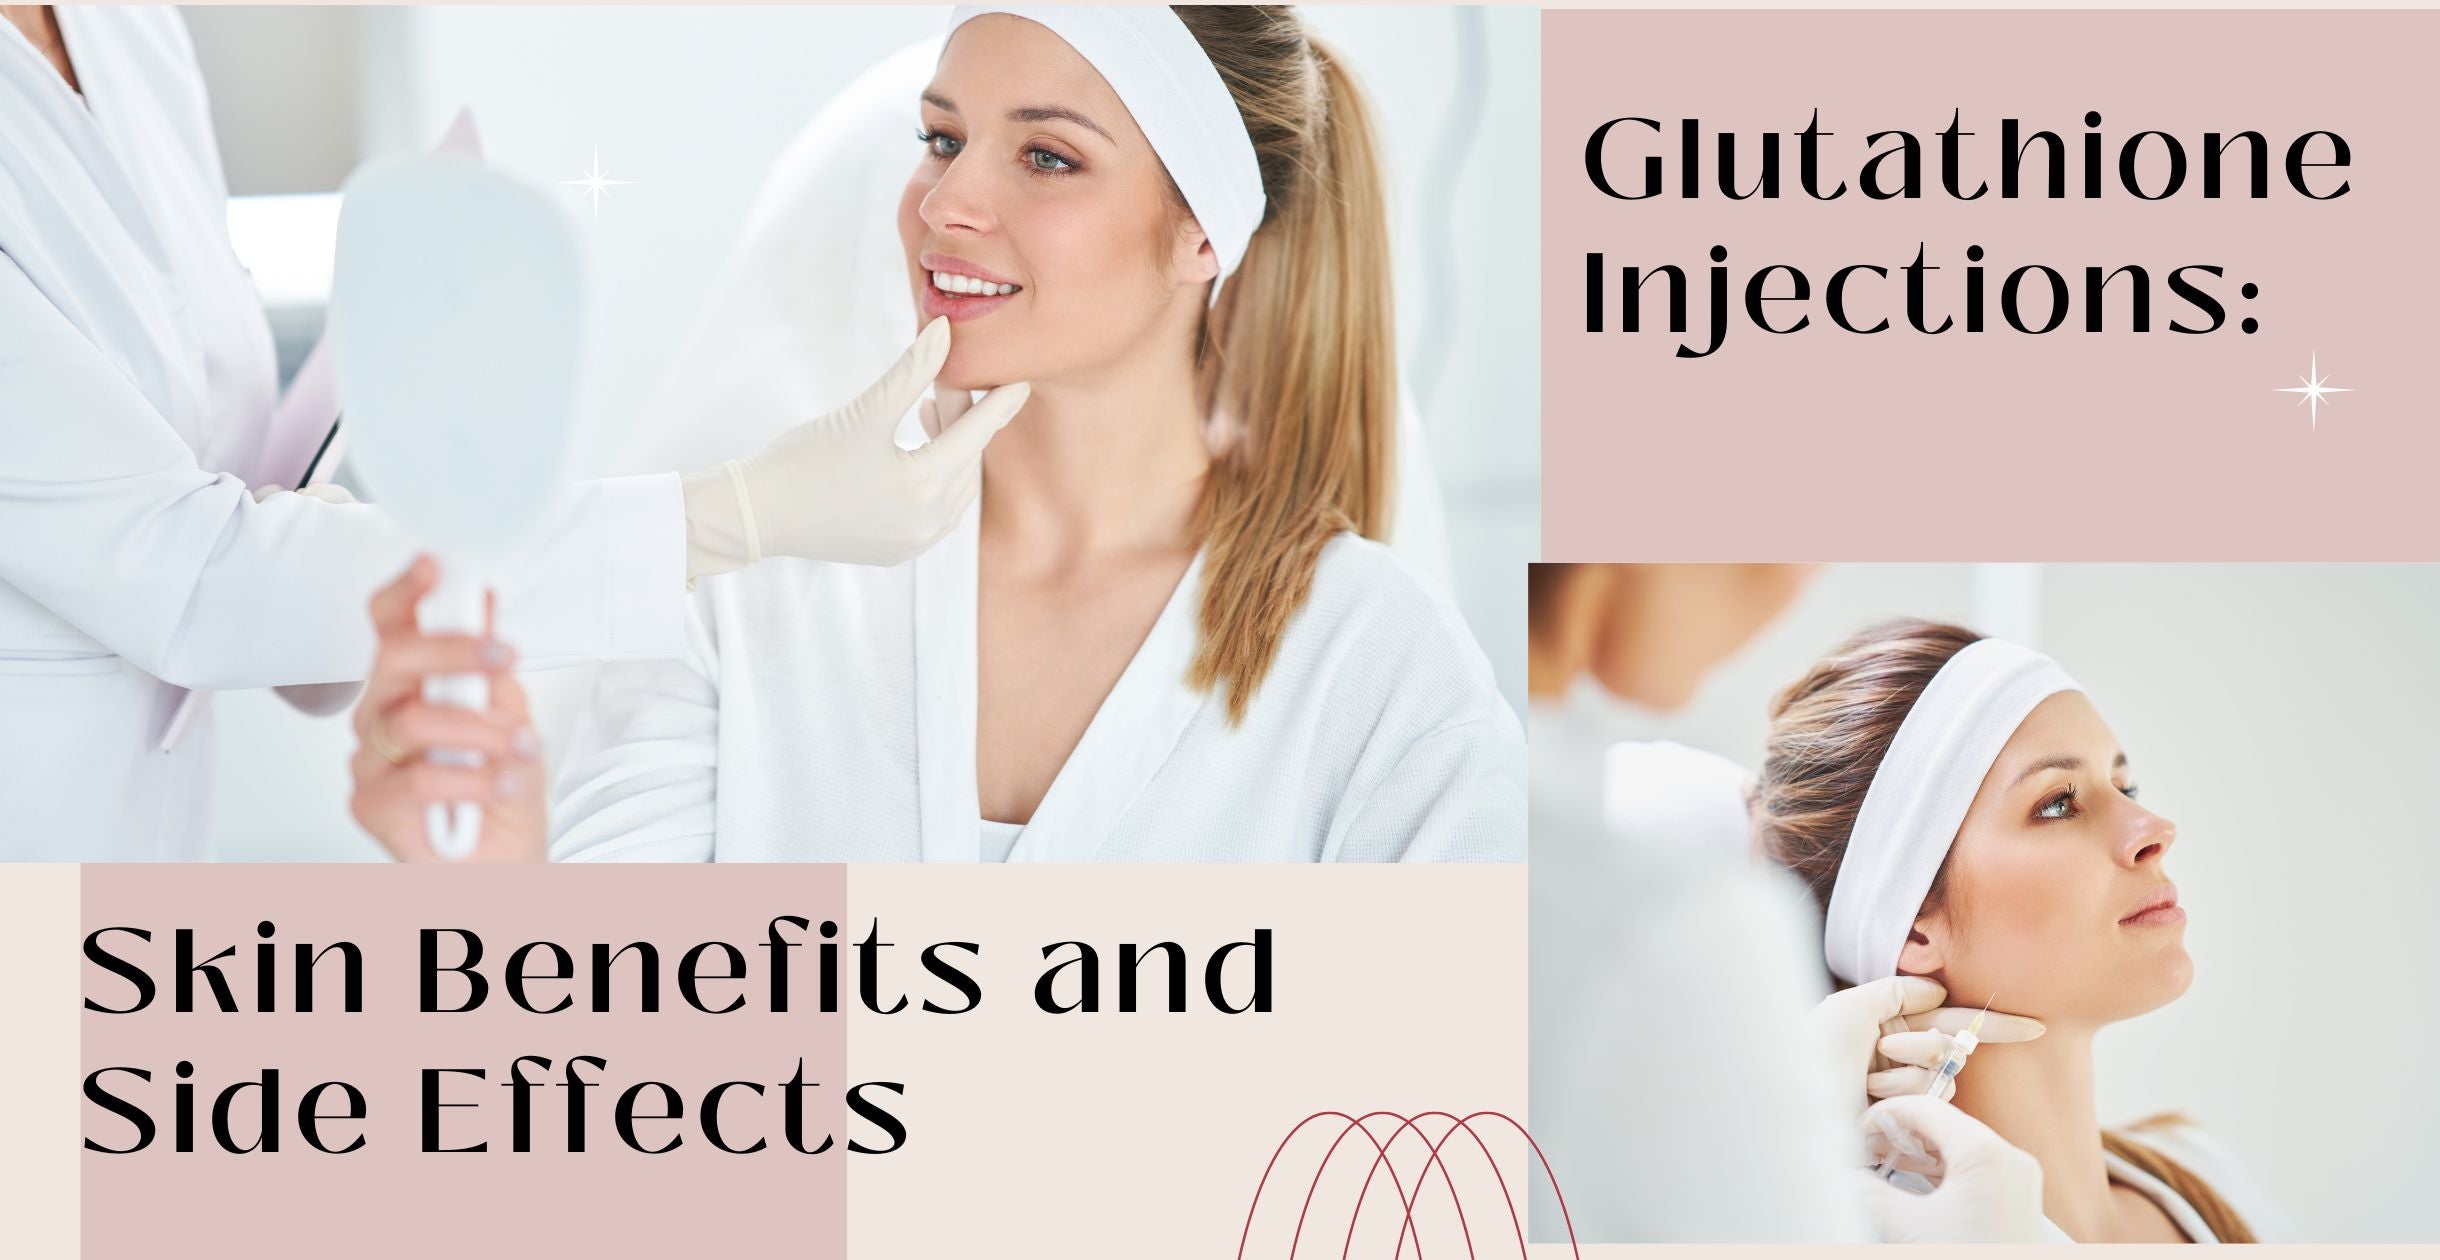 Glutathione Injections: Skin Benefits and Side Effects